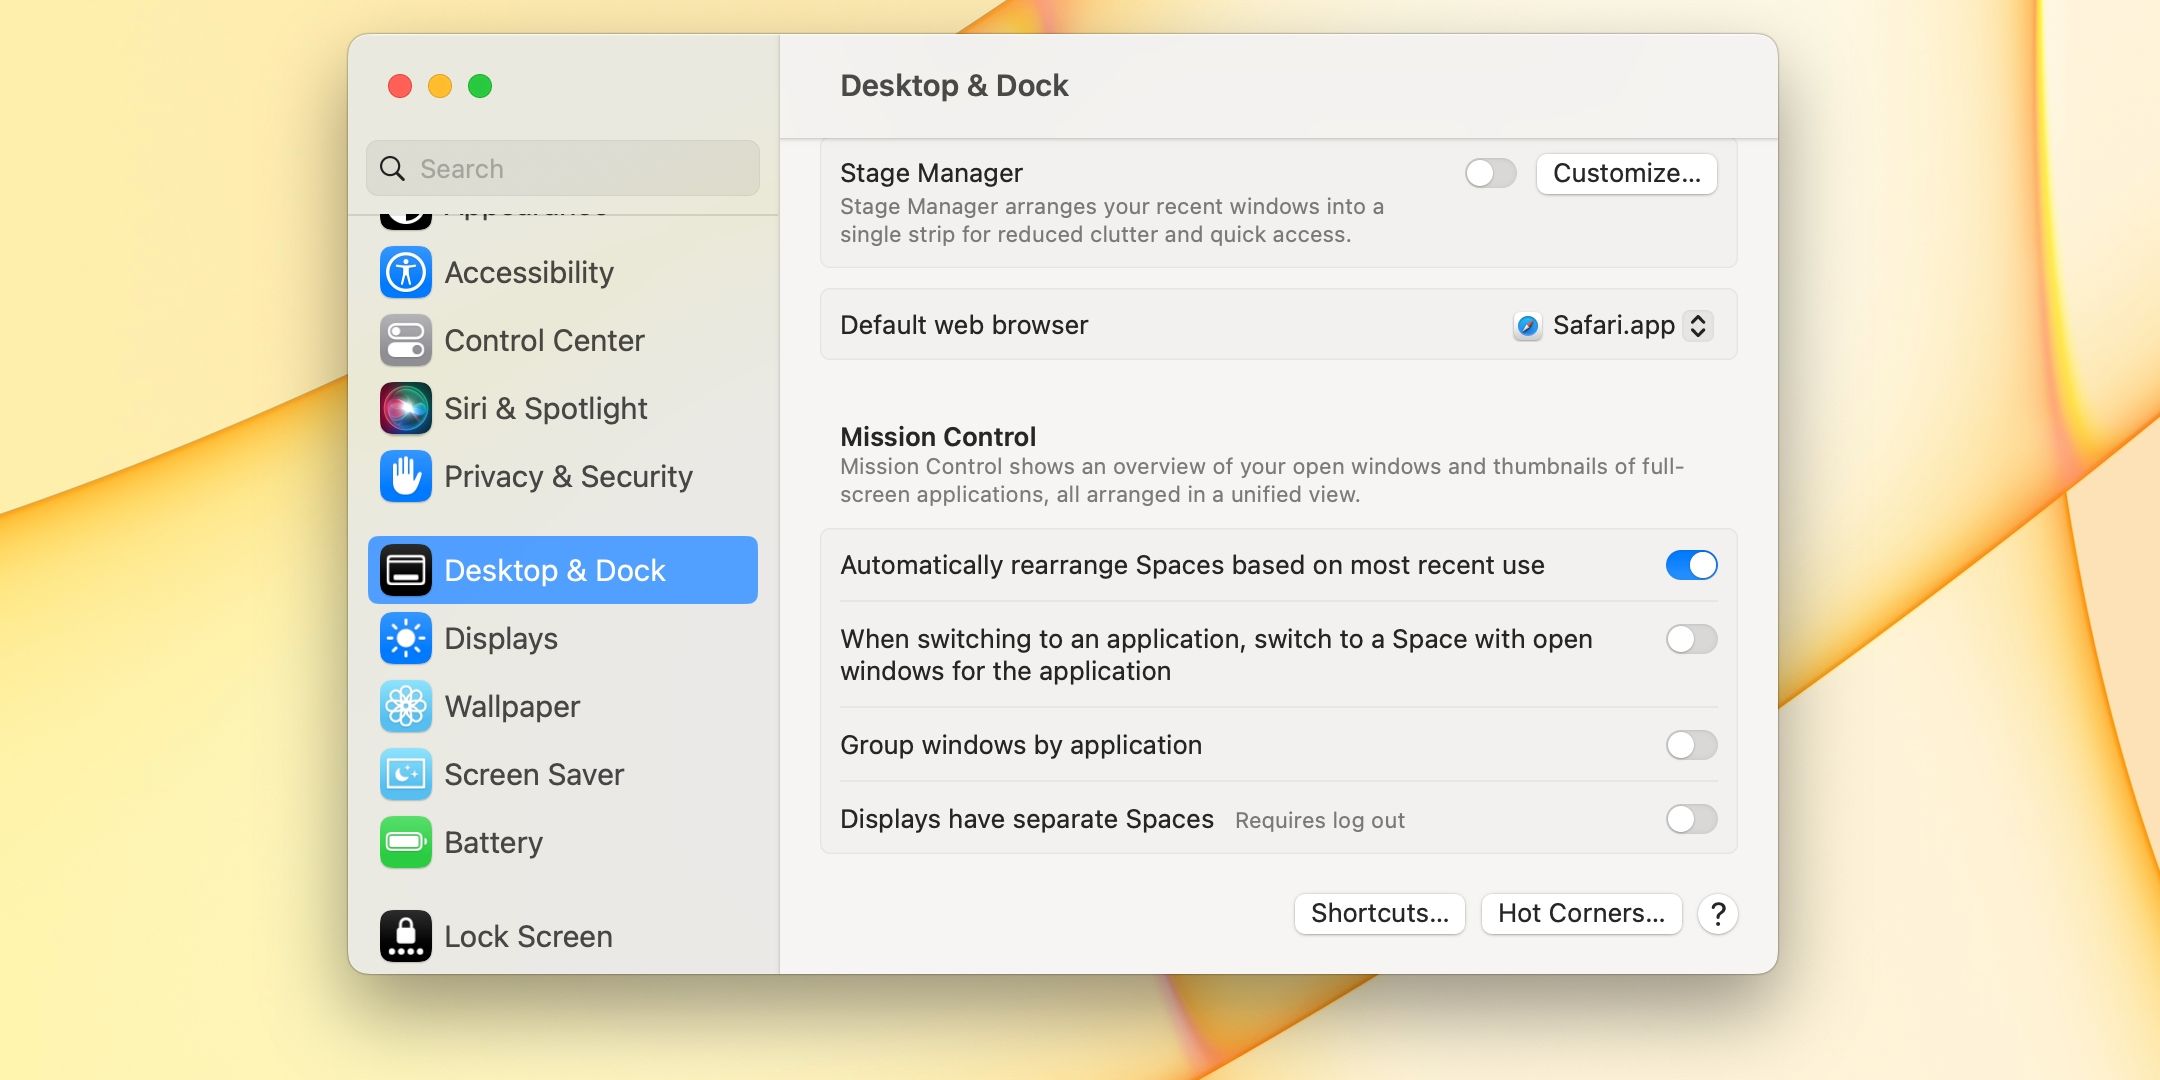 The Desktop and Dock settings in macOS Ventura with the Displays have separate Spaces option disabled